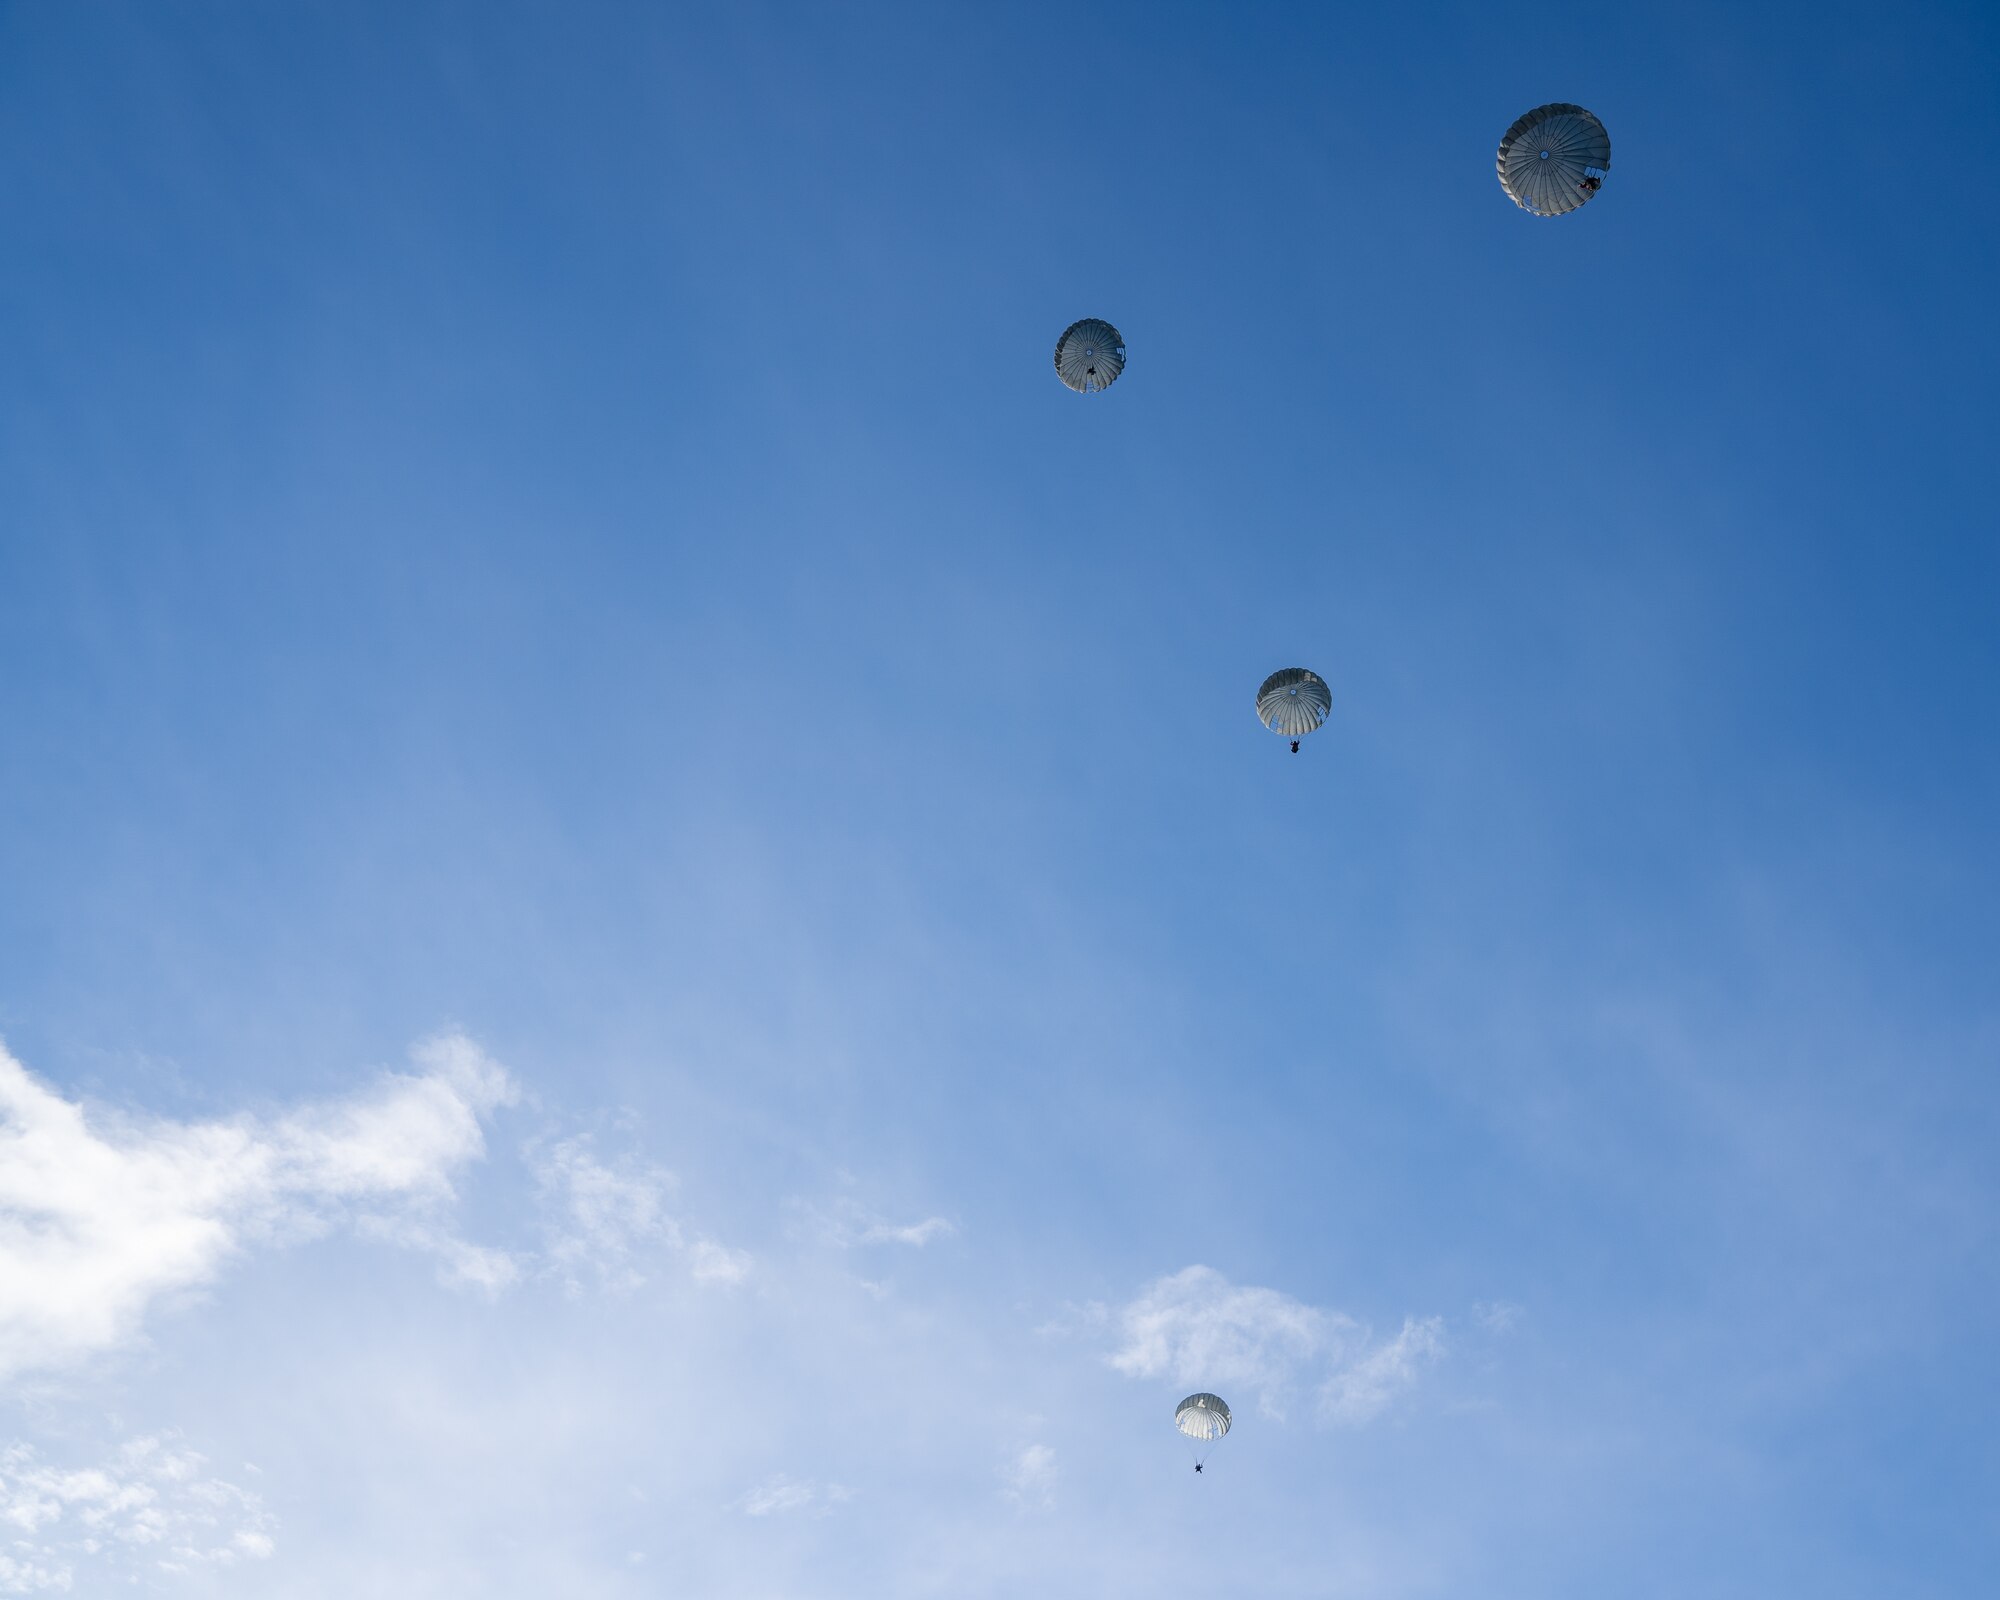 U.S. Air Force pararescuemen assigned to the 212th Rescue Squadron, Alaska Air National Guard, descend upon Malemute Drop Zone during a training event at Joint Base Elmendorf-Richardson.